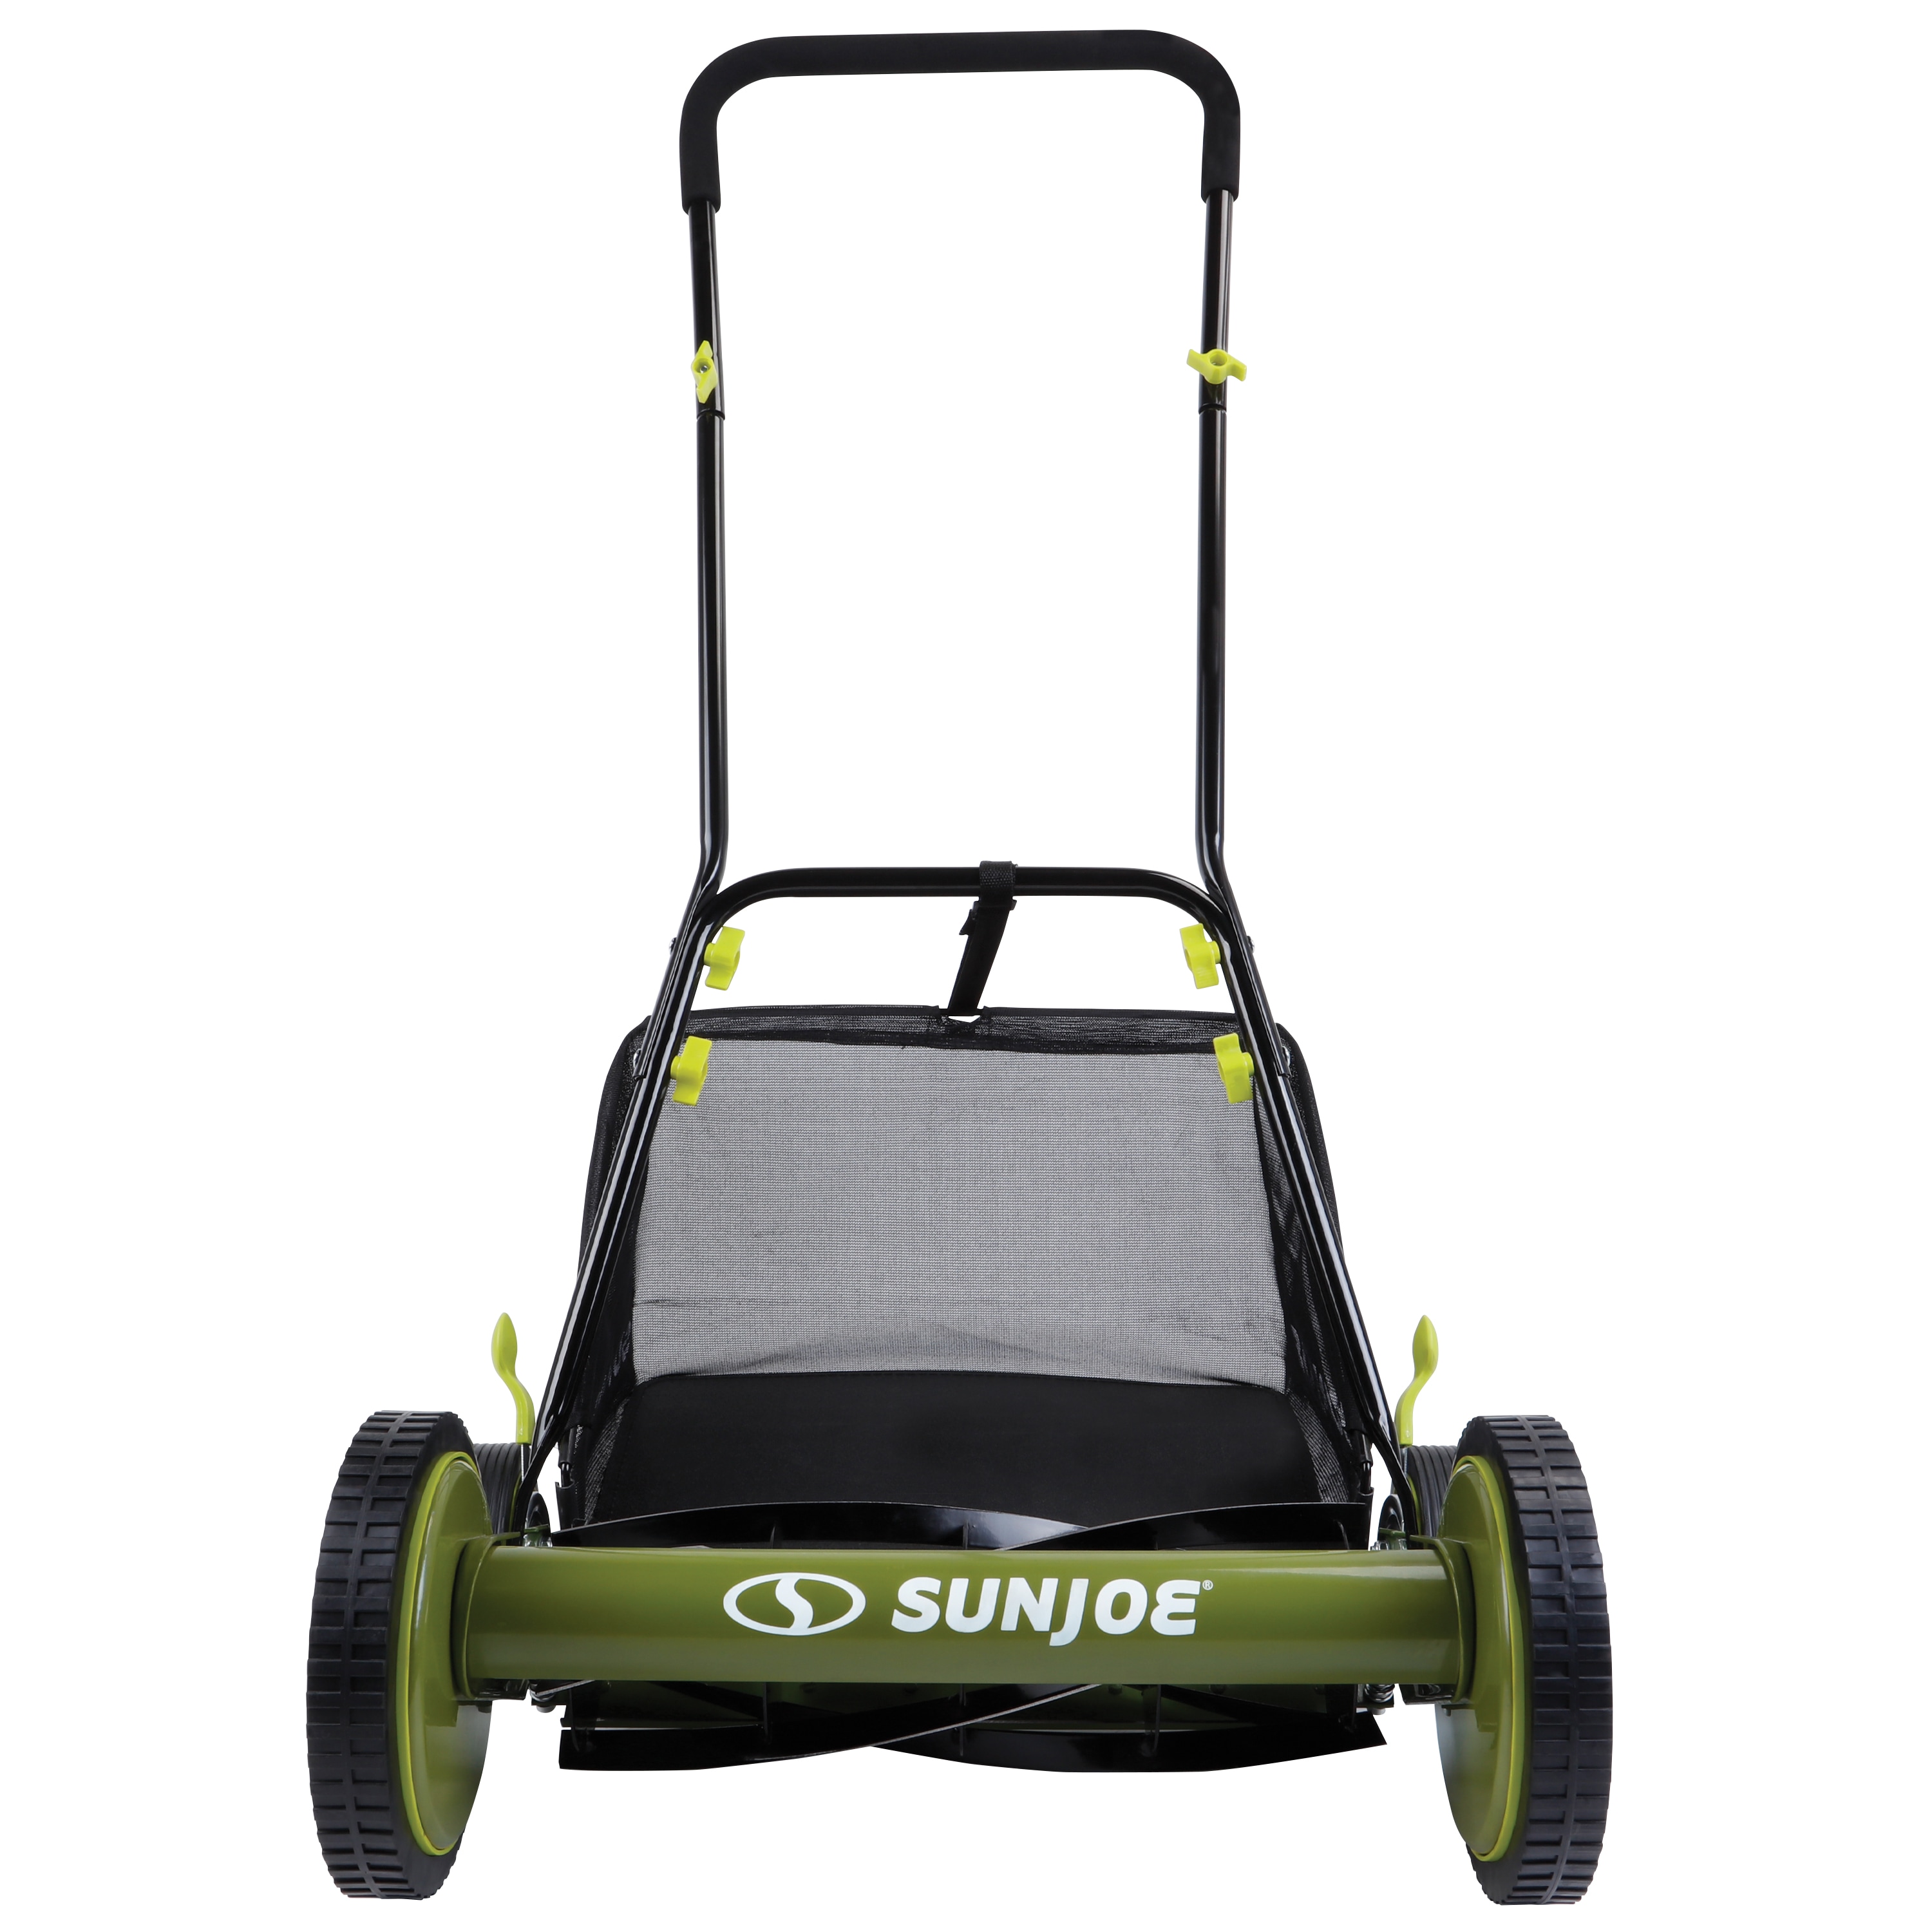  Great States 815-18 18-Inch 5-Blade Push Reel Lawn Mower,  18-Inch, 5-Blade, Grey & Sun Joe AJ801E 12-Amp, Electric Dethatcher and  Scarifier w/Removeable 8-Gallon Collection Bag : Patio, Lawn & Garden